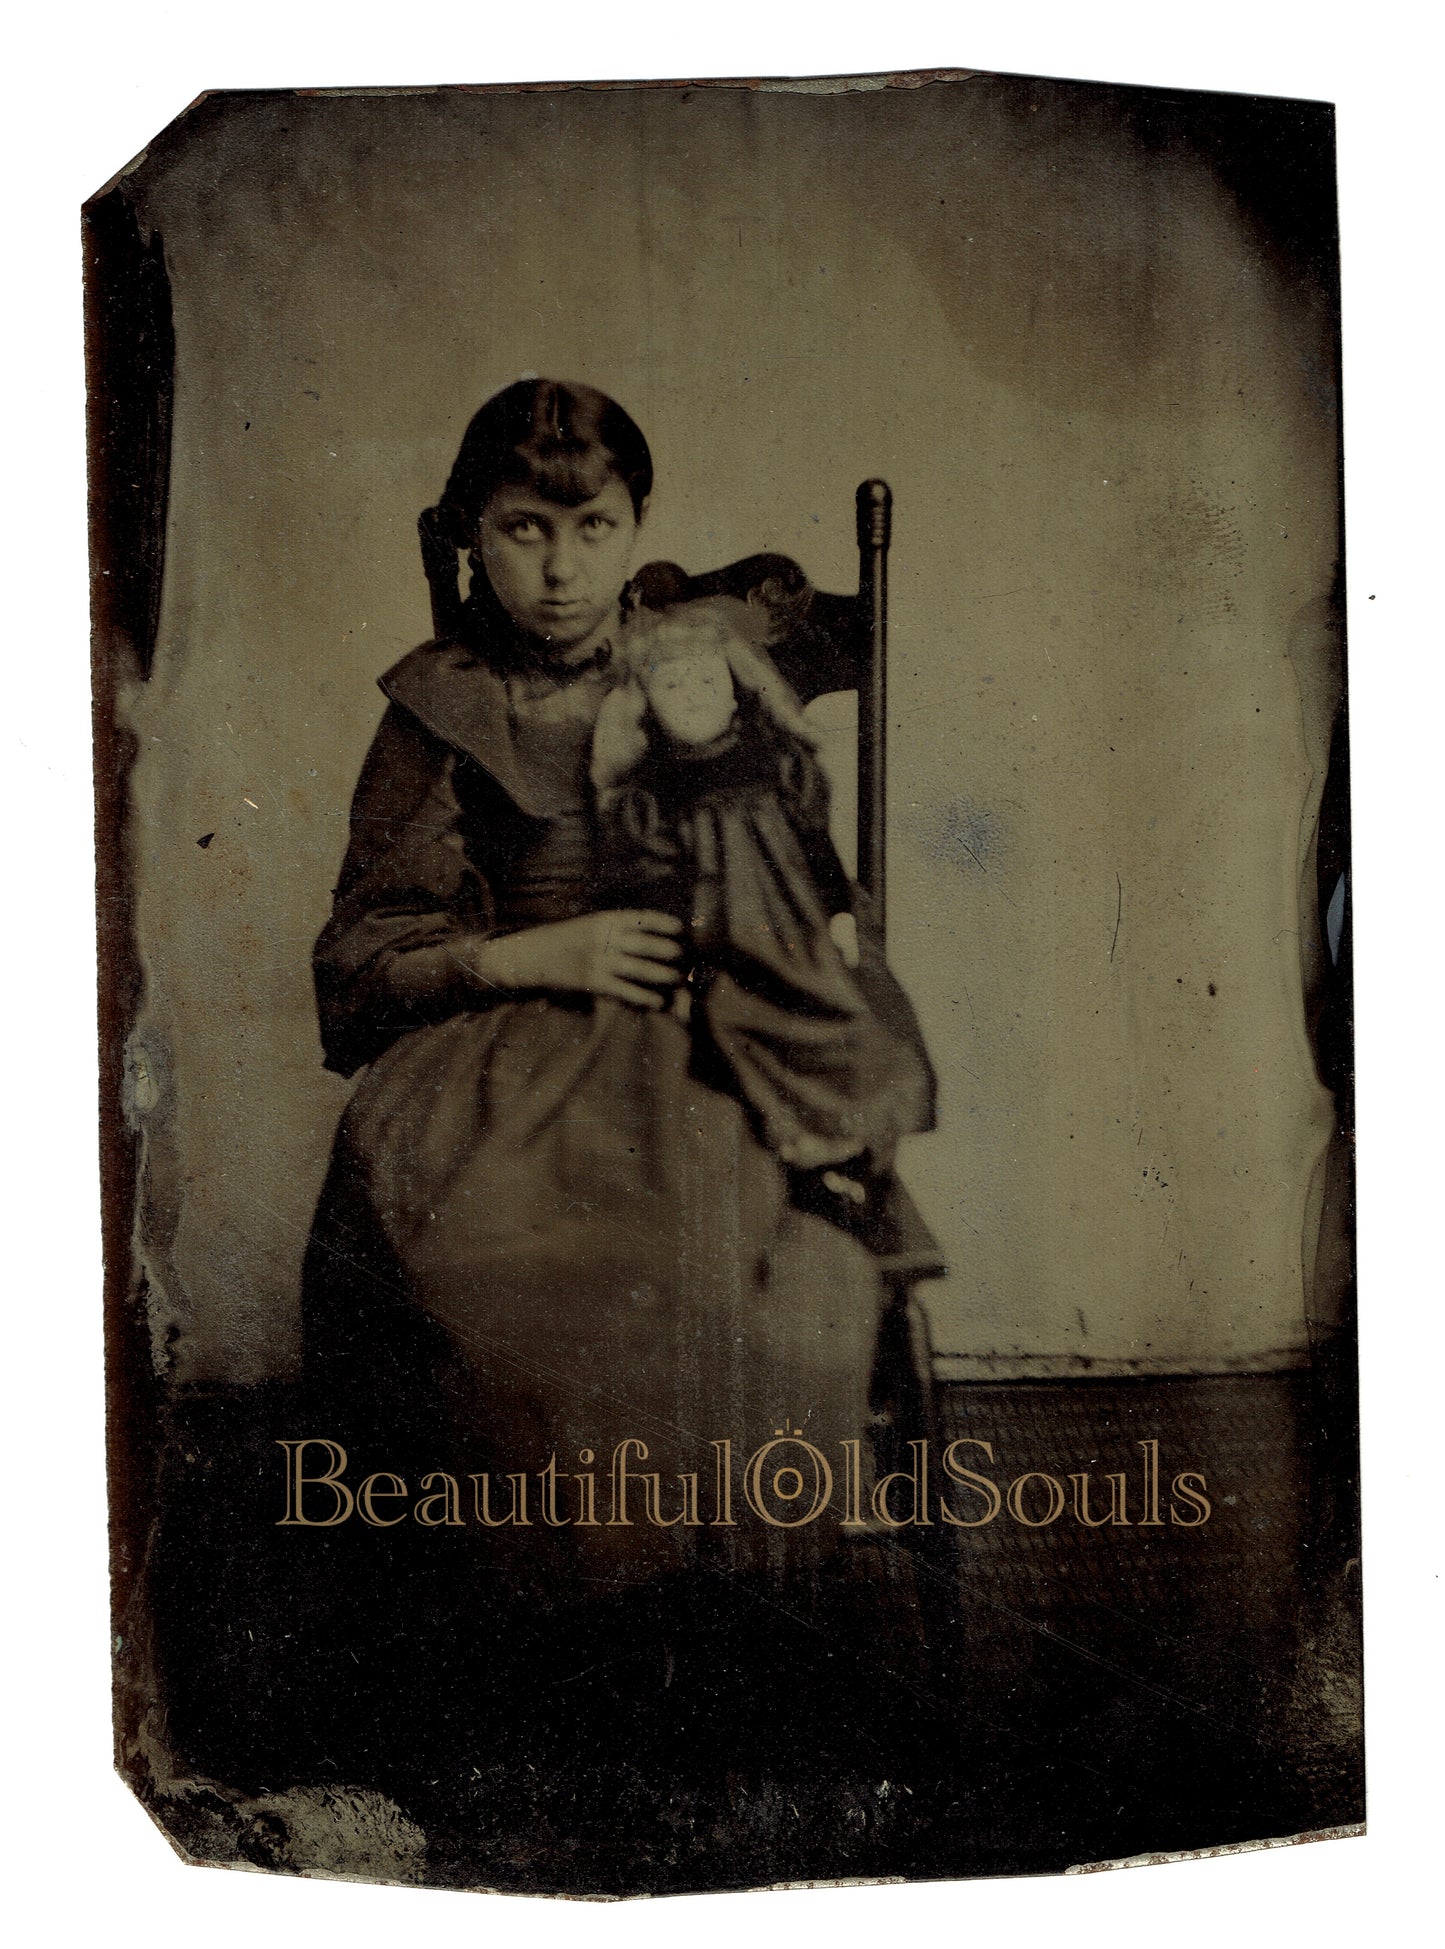 Antique Tintype Girl with Sanpaku Eyes & Doll Spooky